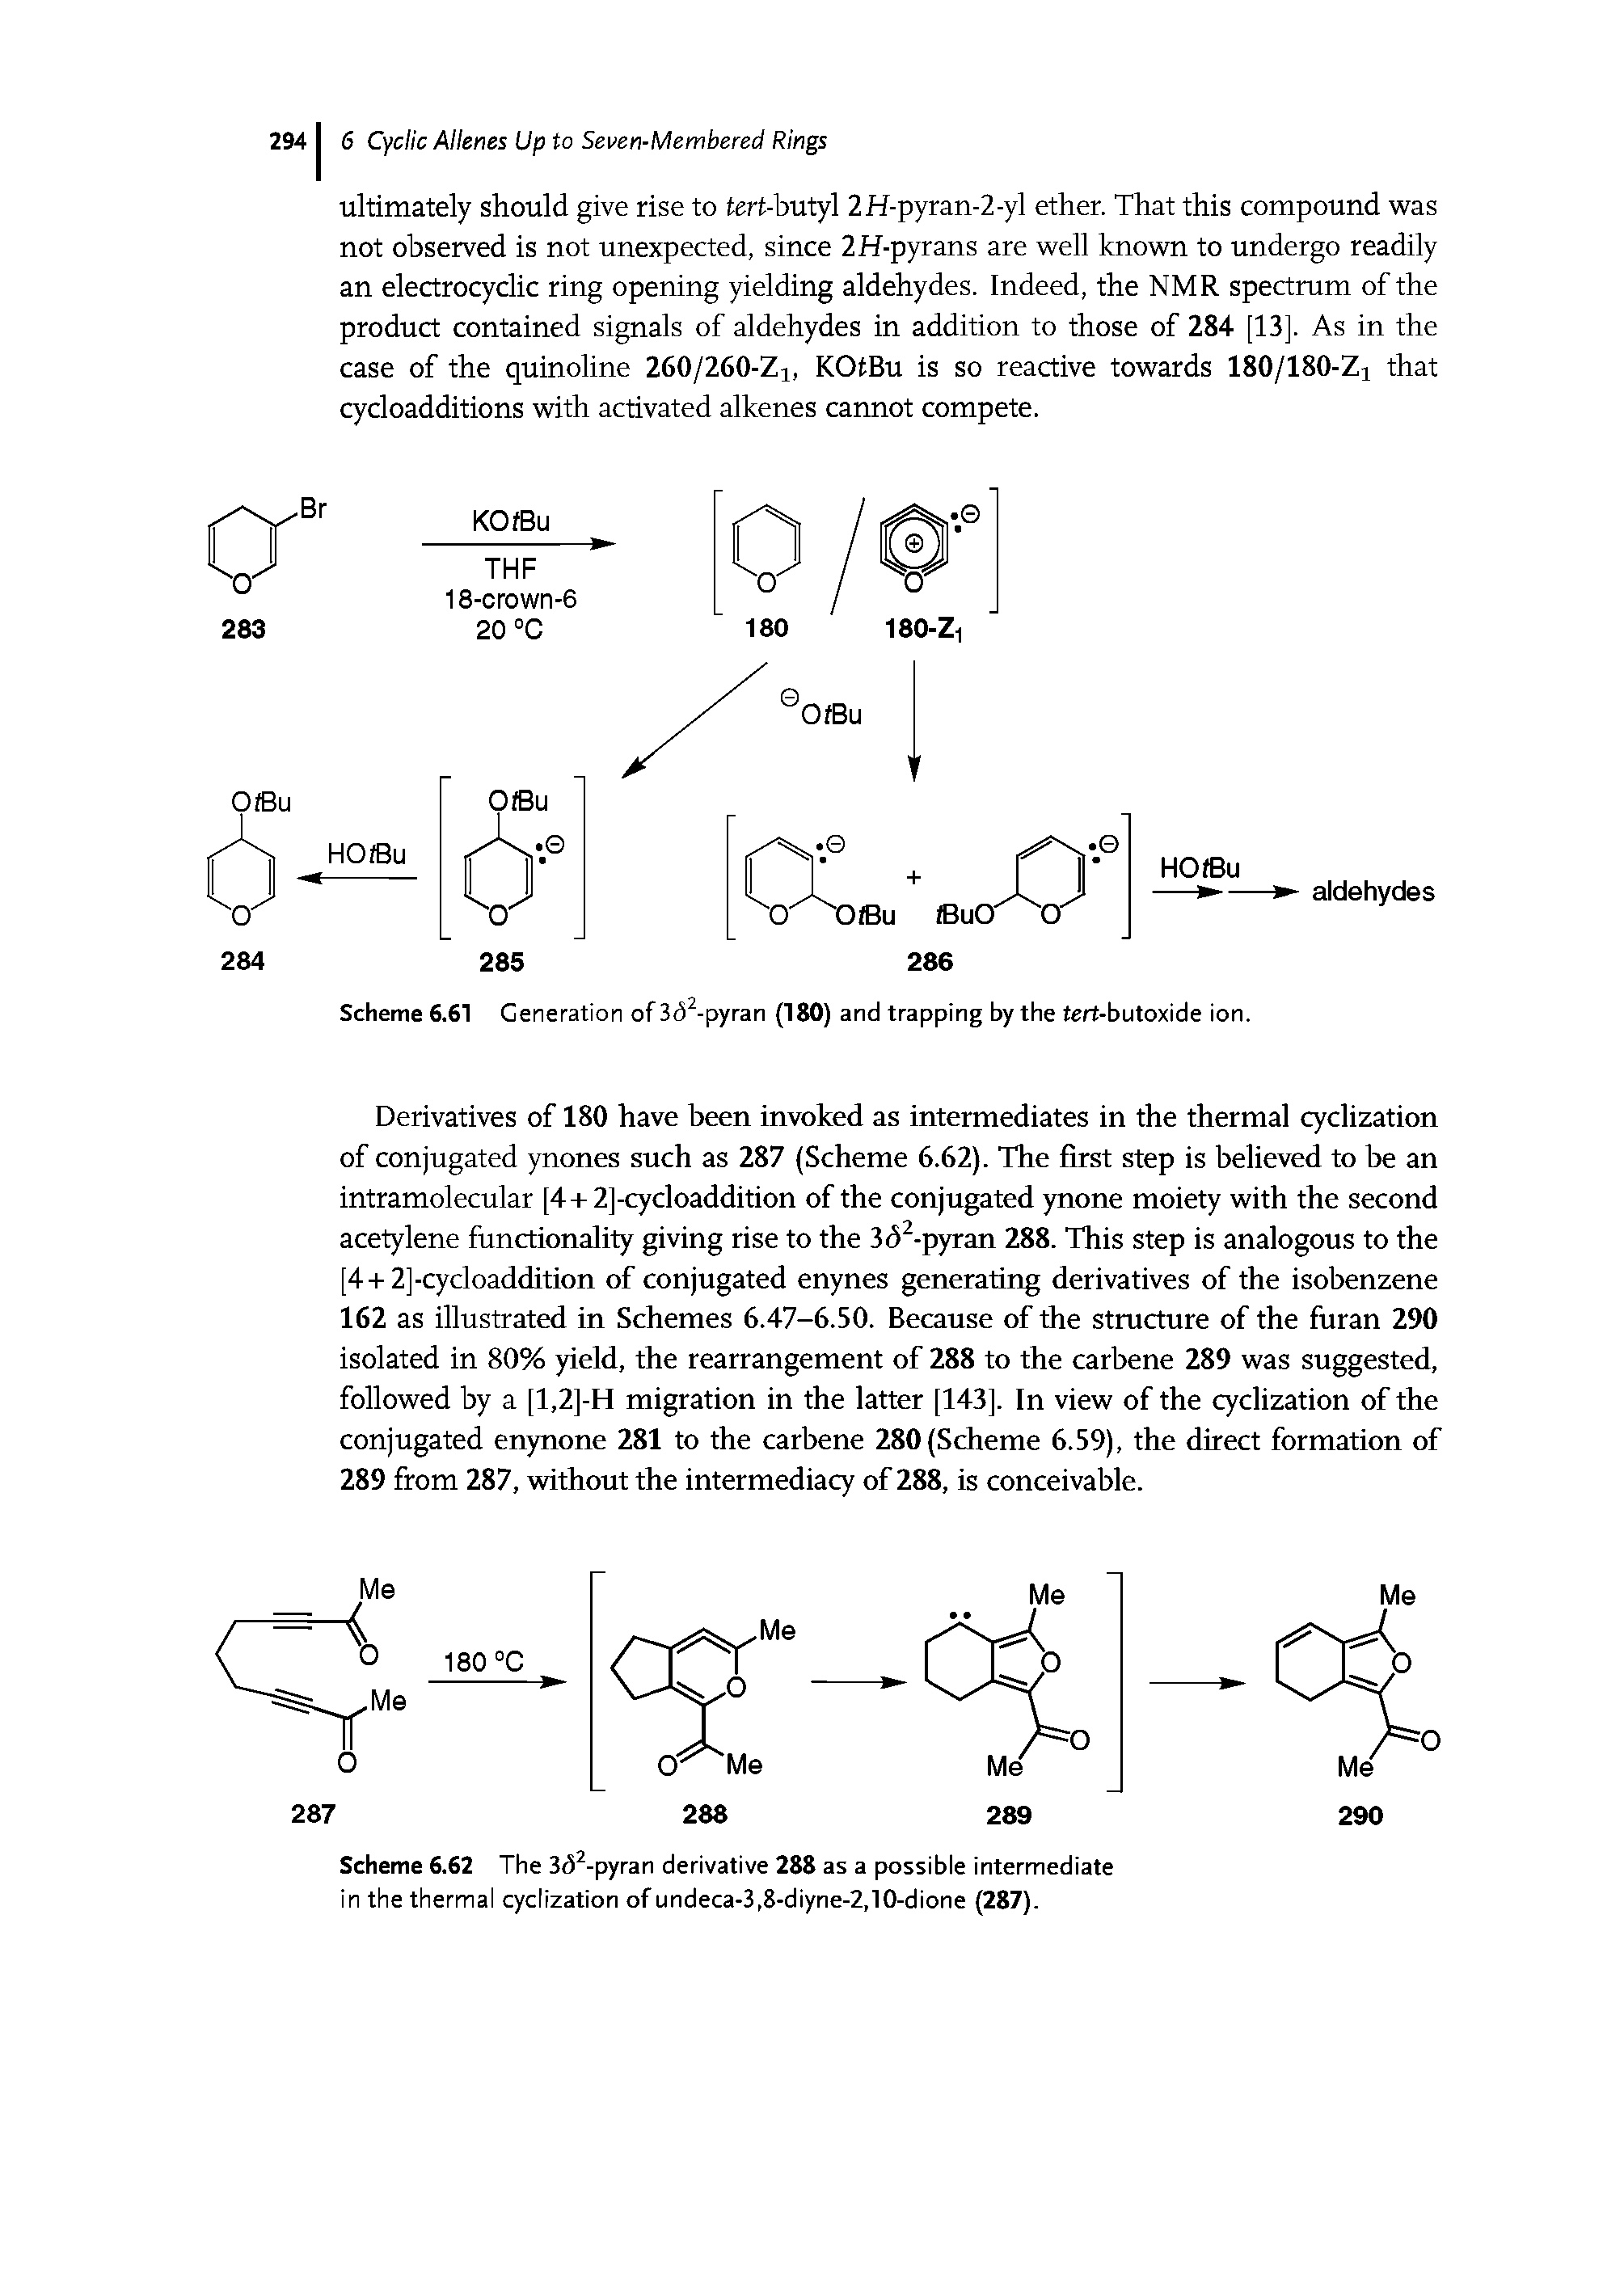 Scheme 6.62 The 3<52-pyran derivative 288 as a possible intermediate in the thermal cyclization of undeca-3,8-diyne-2,10-dione (287).